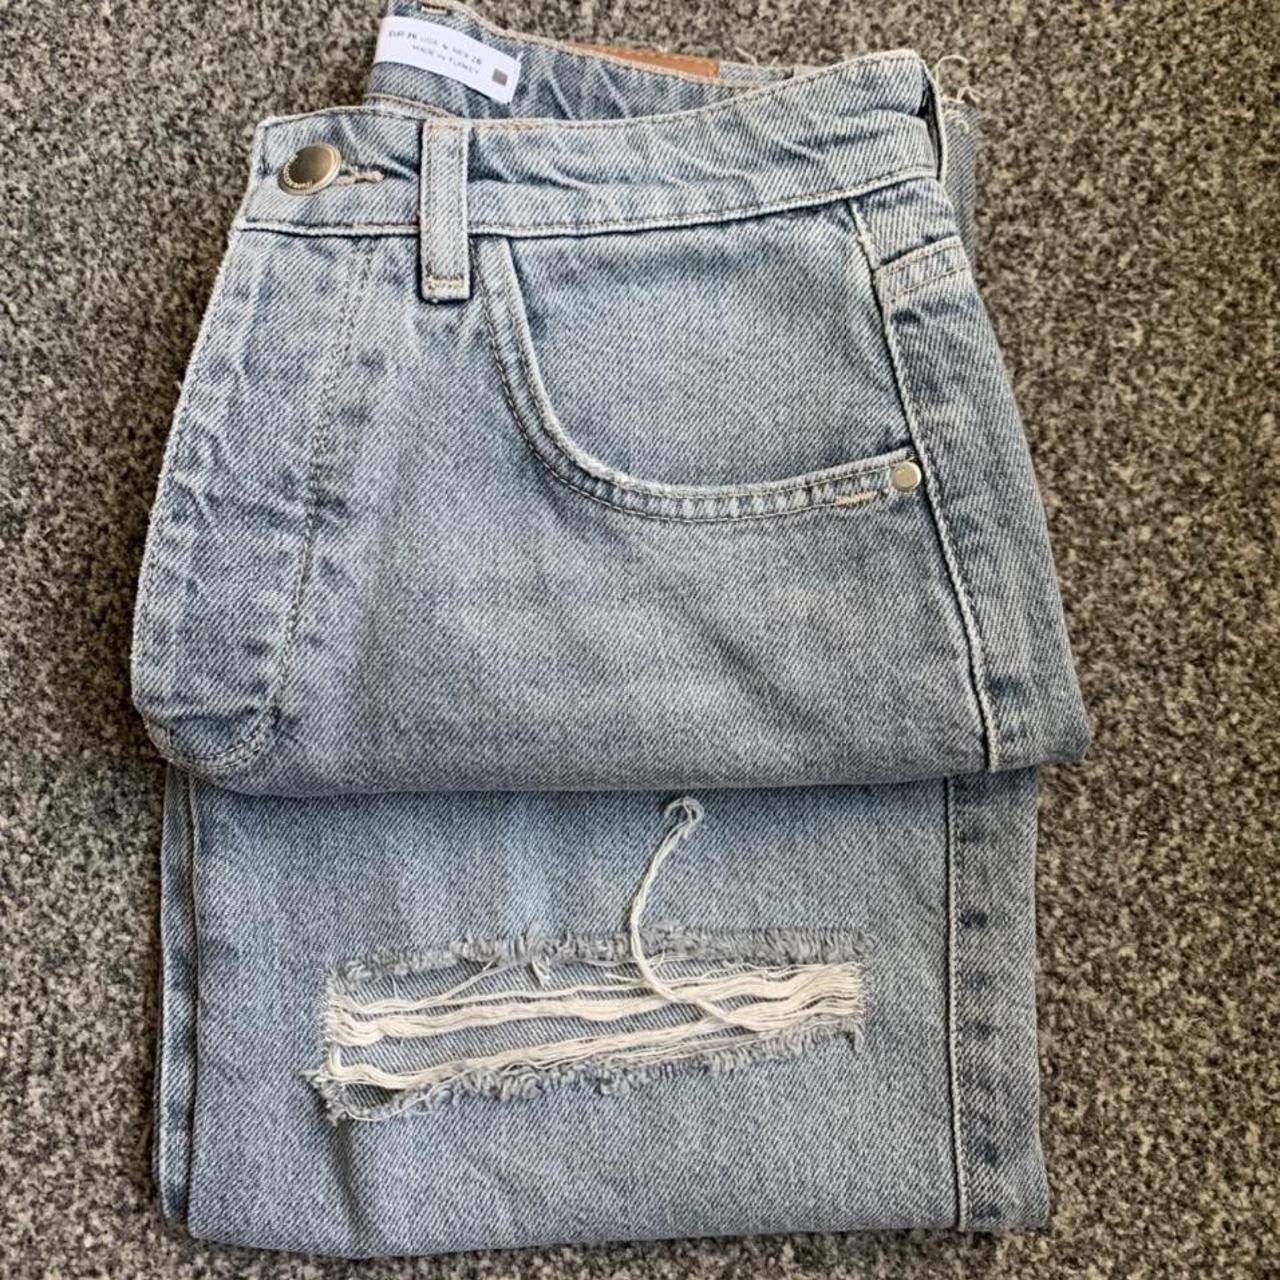 Product Image 1 - Brand new Zara jeans the